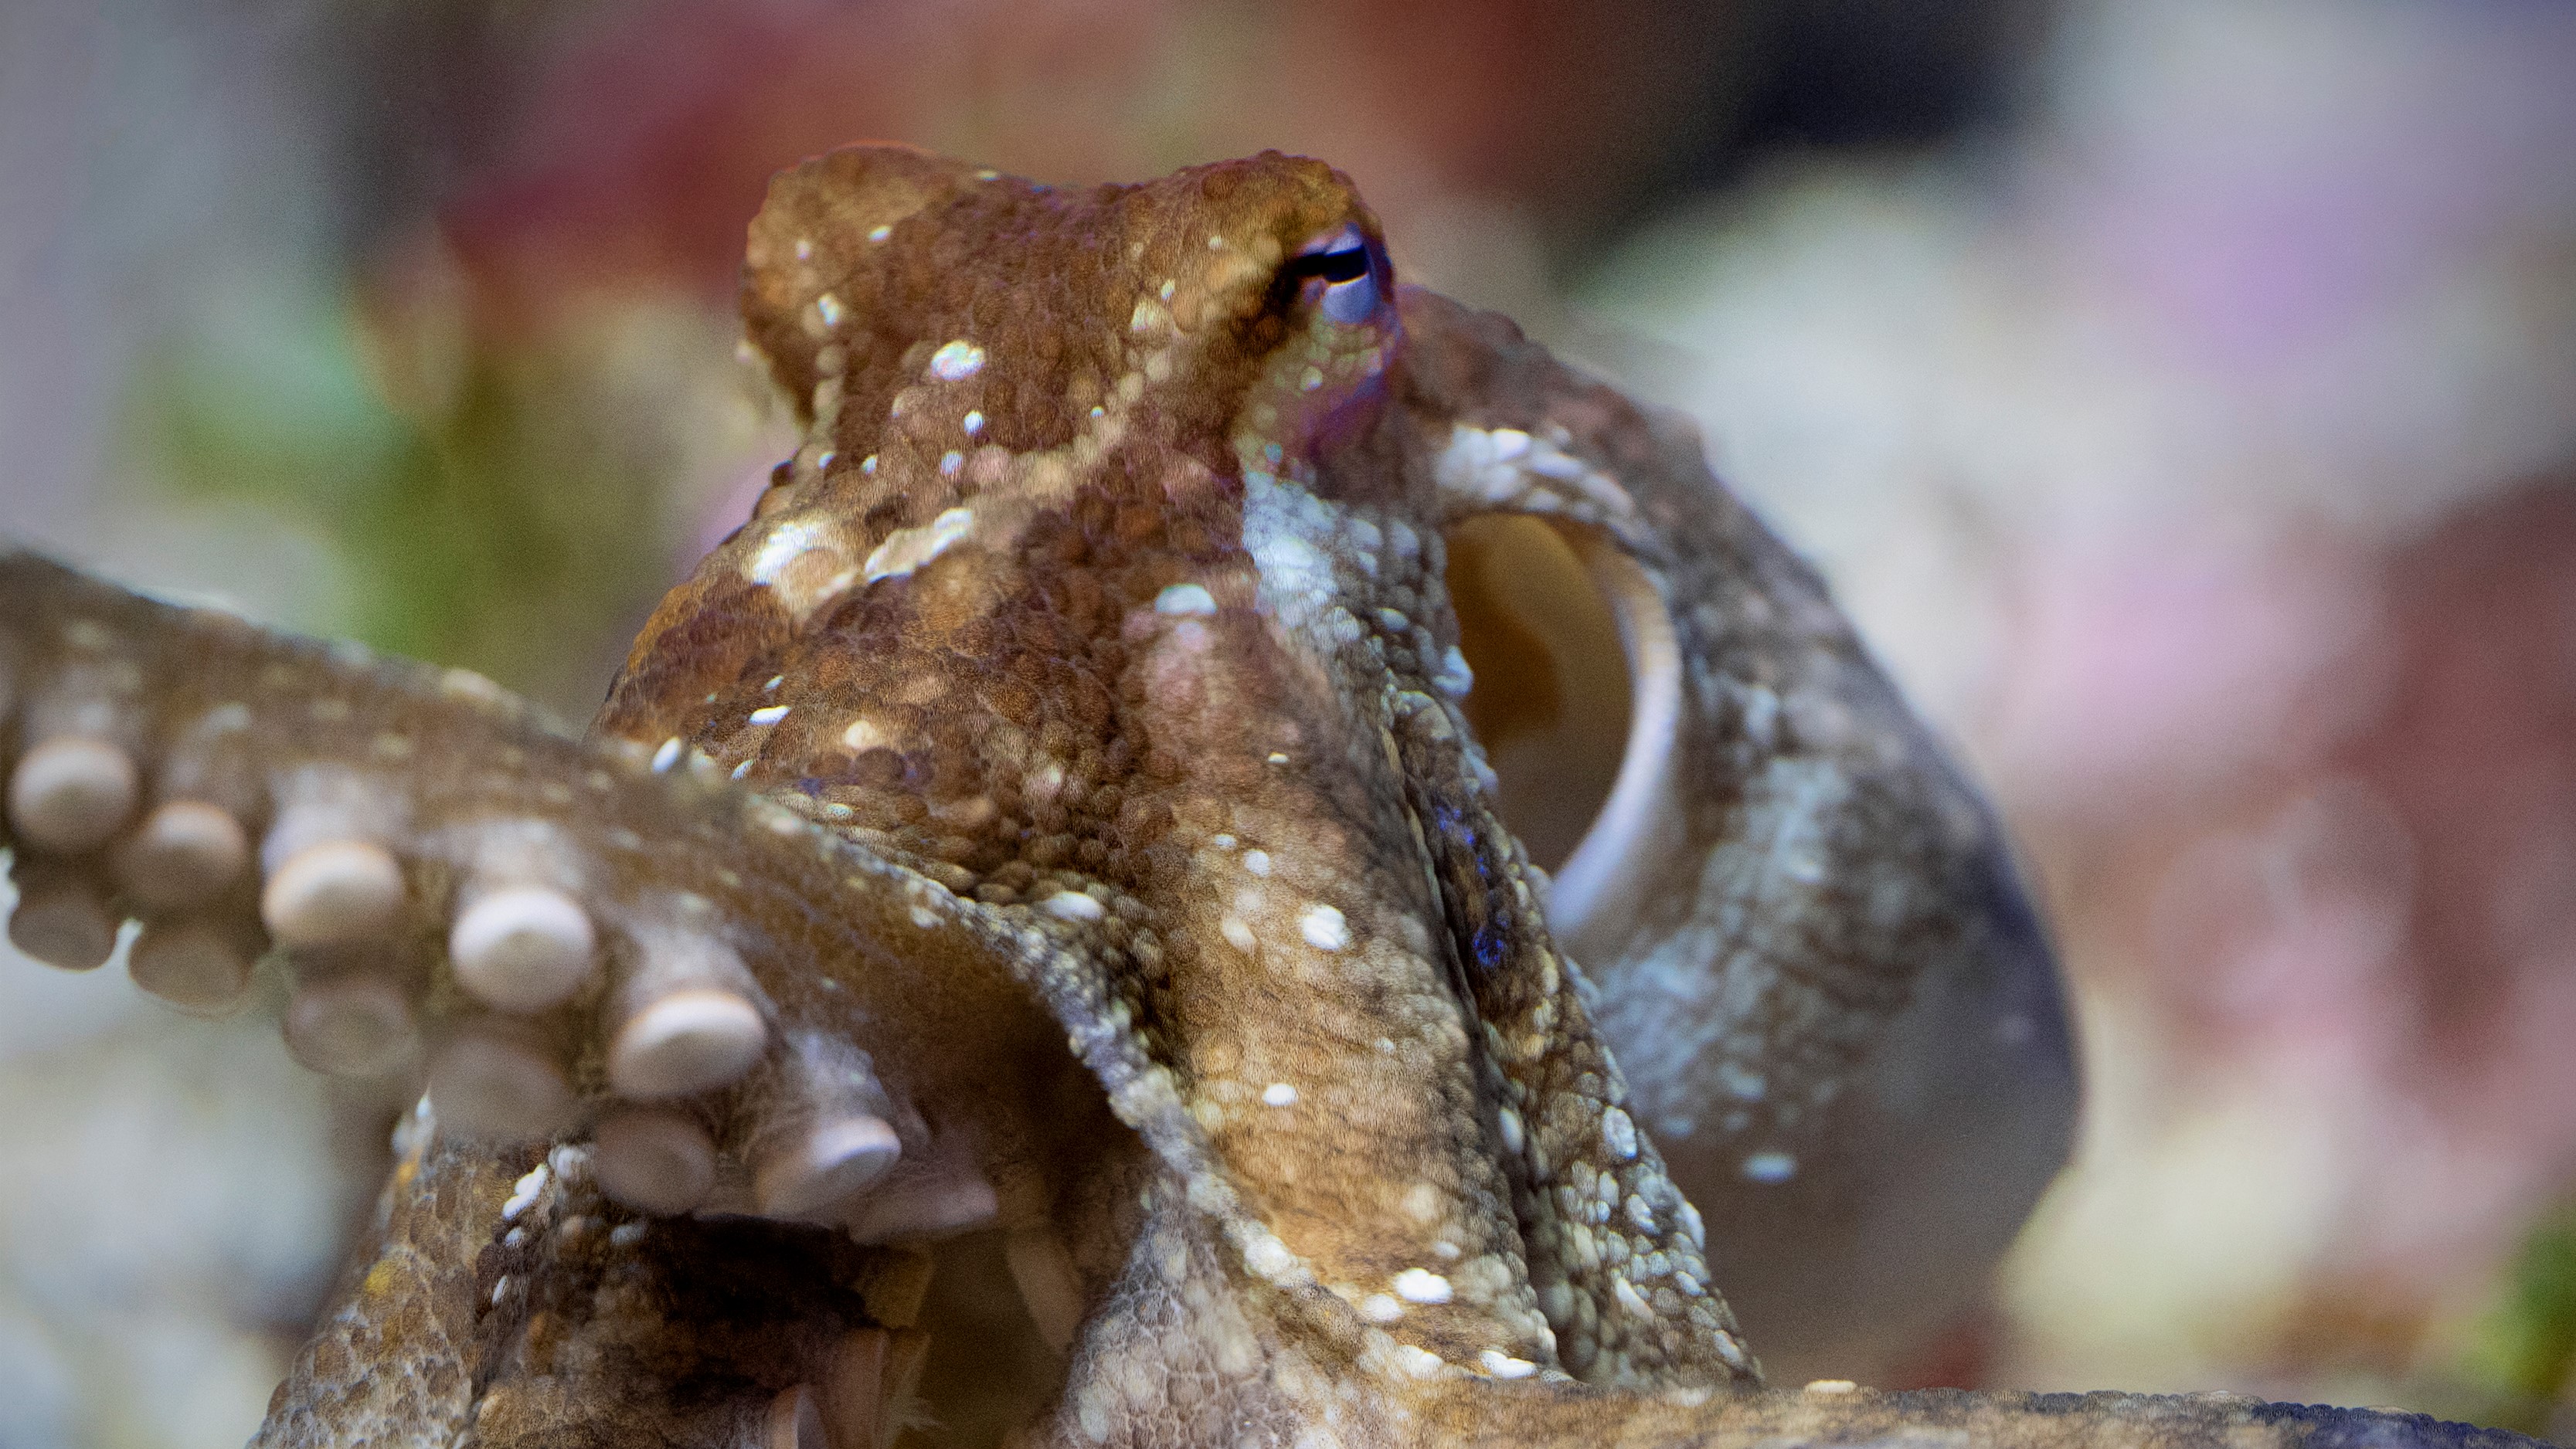 A two-spot octopus with its tentacles and suckers showing